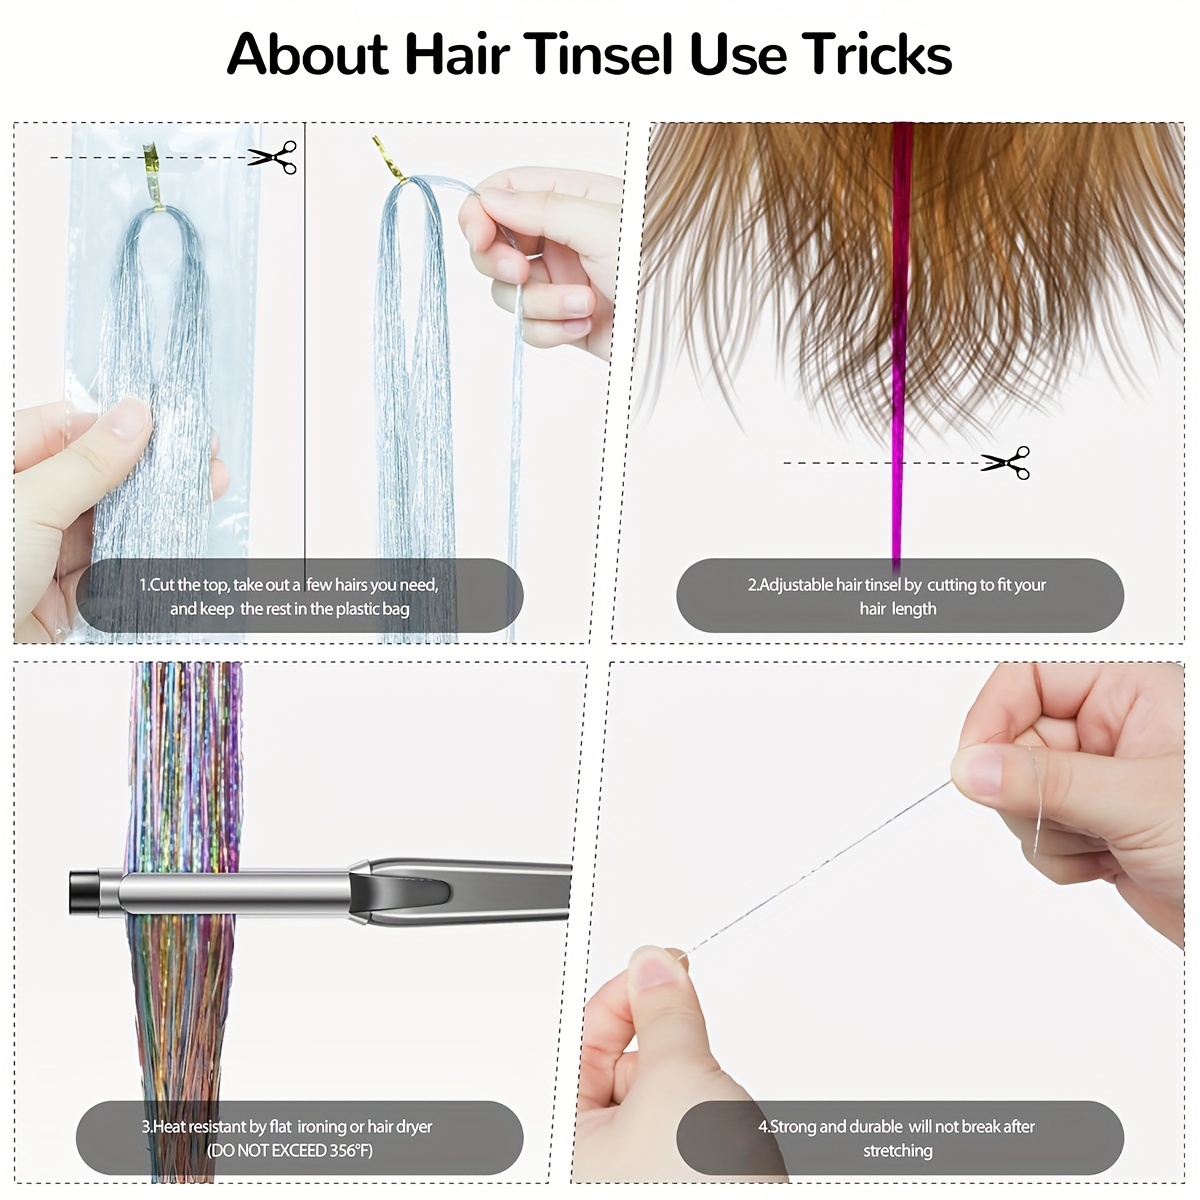 How To Add Hair Tinsel To Your Own Hair At Home — DIY Home